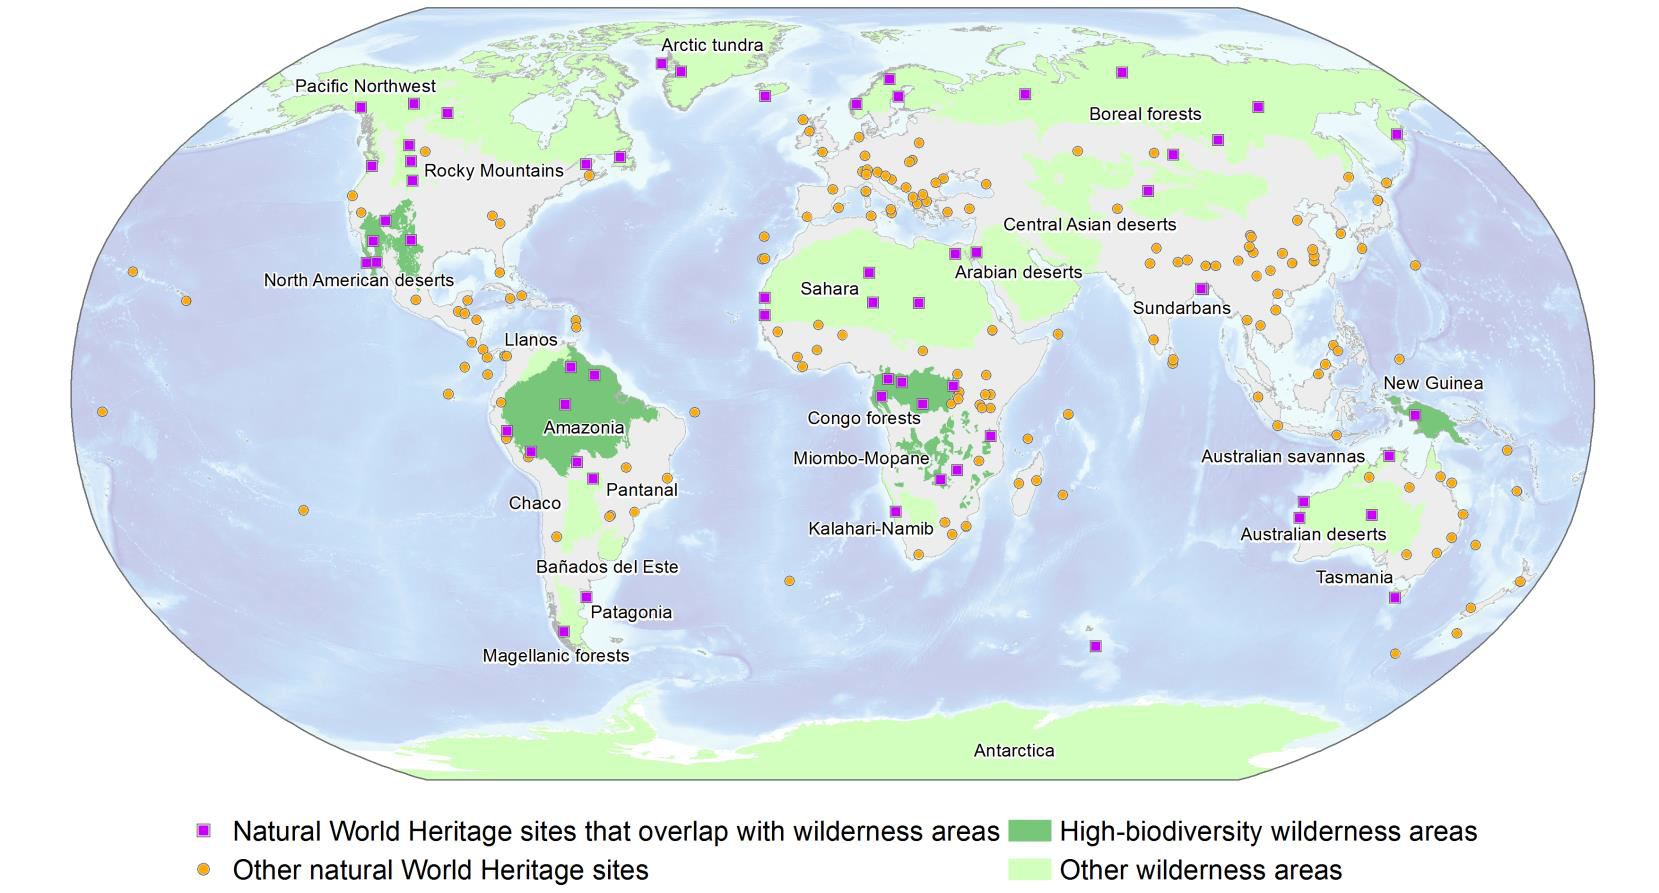 World Heritage sites and wilderness areas